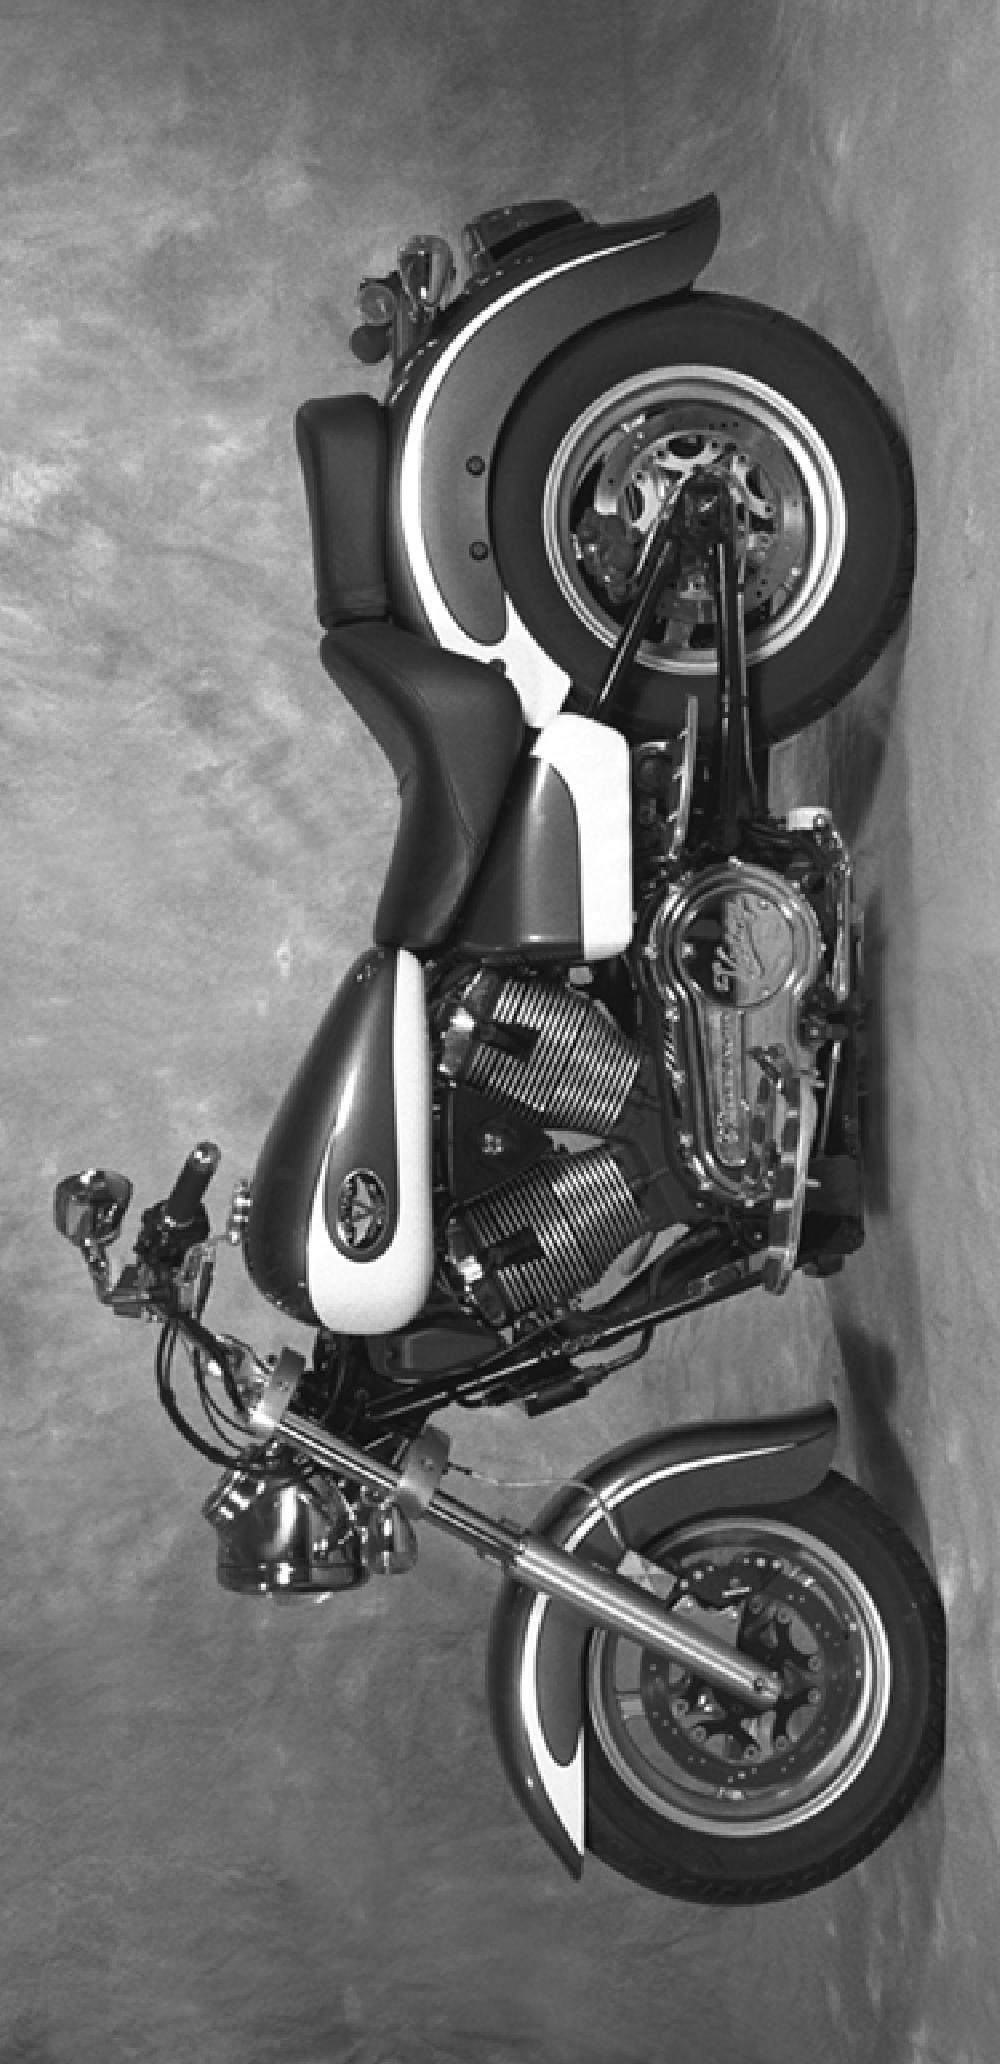 Motorcycle Description 3 4 5 6 5 7 8 9 10 11 12 2 1 13 14 22 21 20 19 18 17 16 15 1. Front Forks - page 85 2. Front Turn Signal/Running Light - page 39 3. Headlamp - page 39 4. Air Filter - page 76 5.